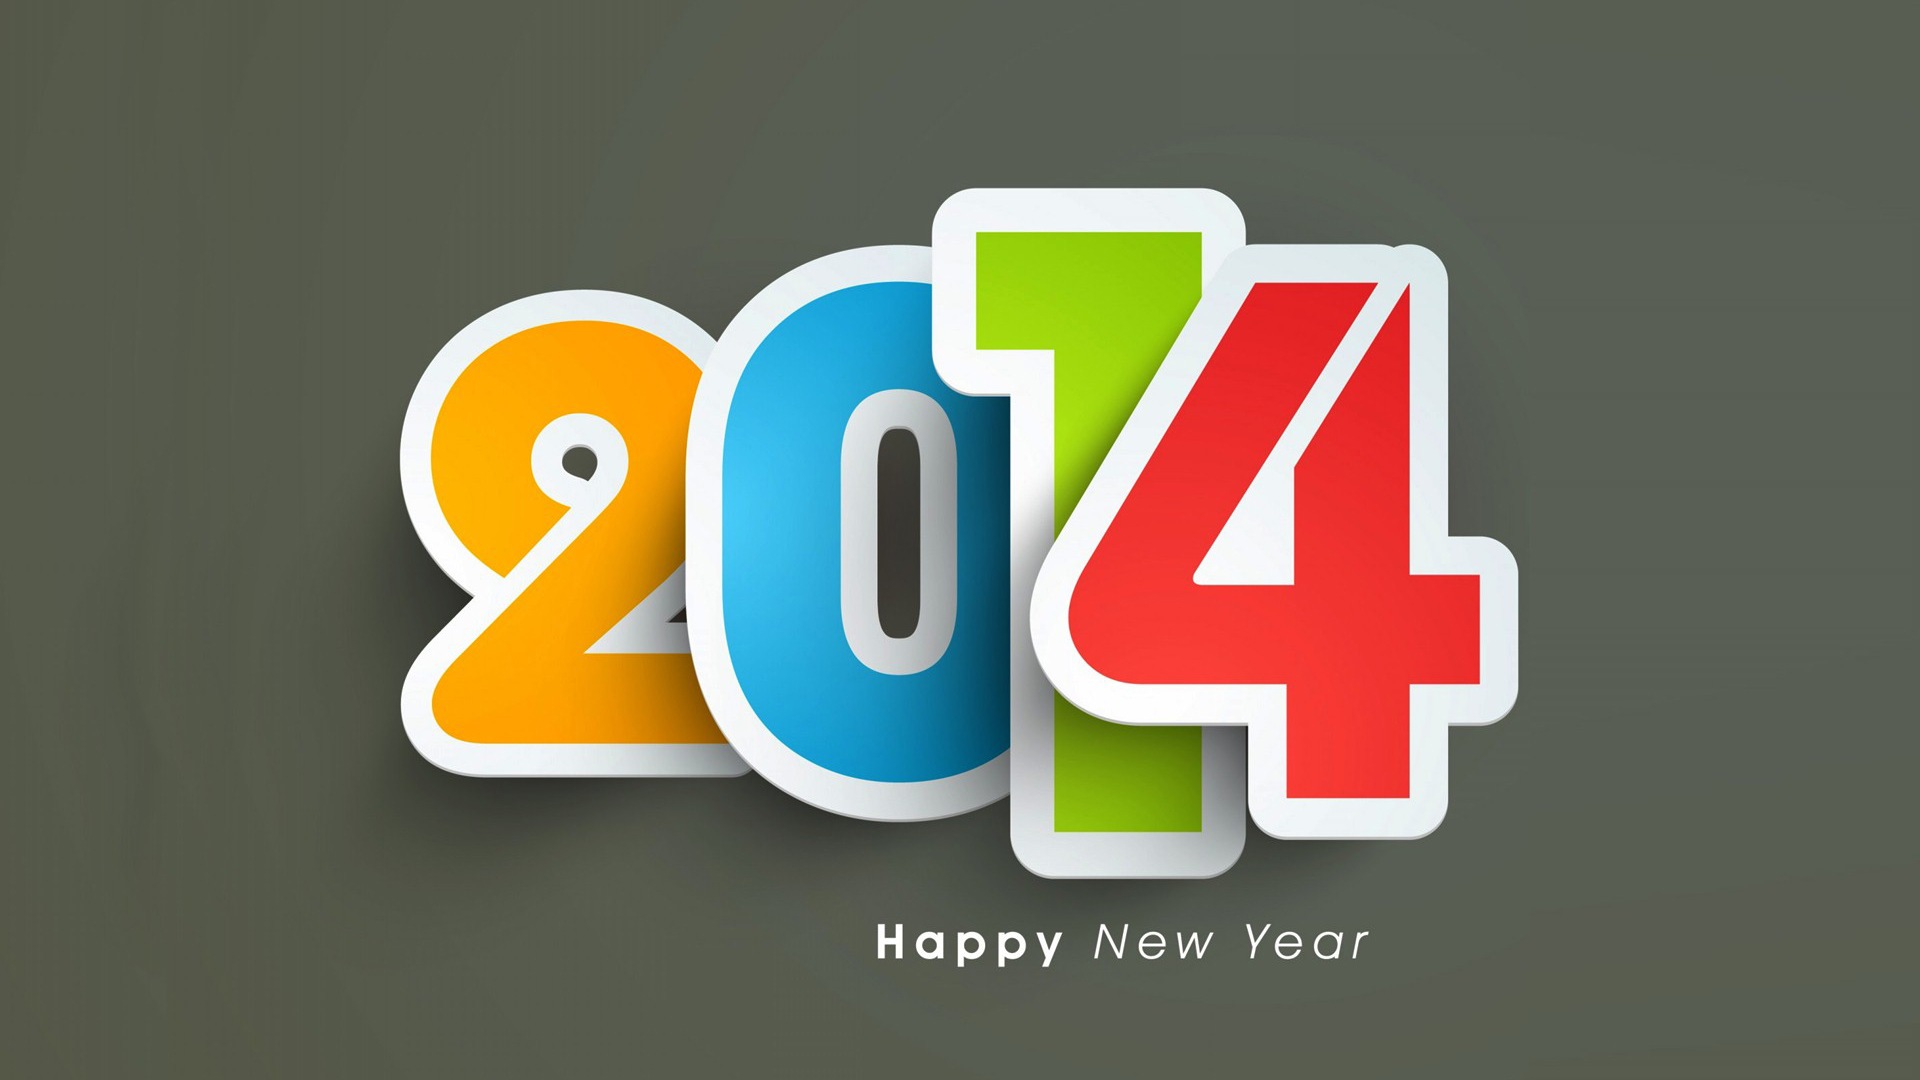 2014 New Year Theme HD Wallpapers (2) #9 - 1920x1080